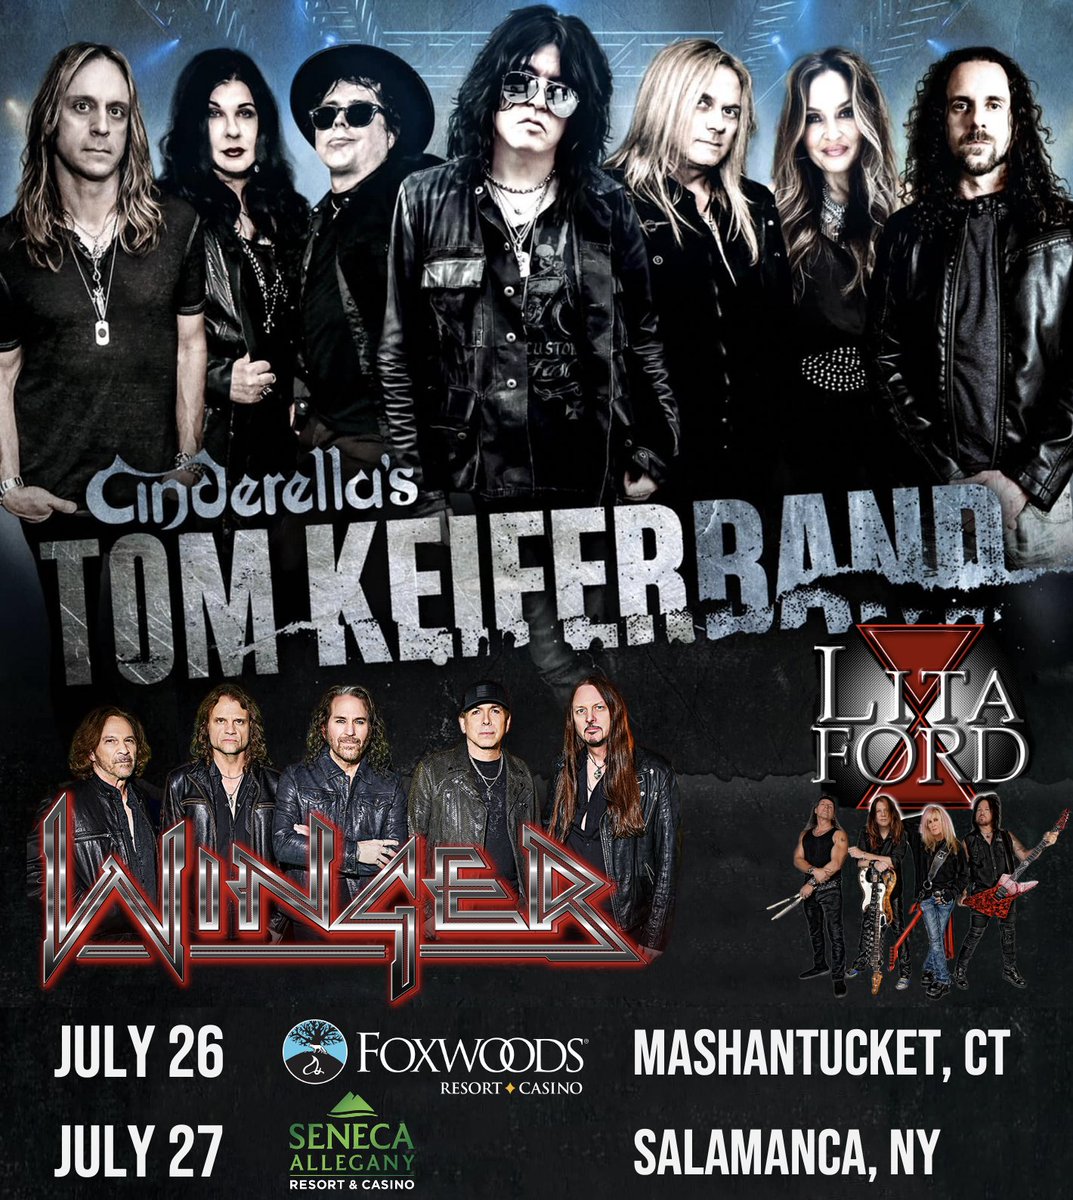 Excited to play 2 shows with our friends @TomKeiferMusic and @LitaFord in July! 📍July 26 - Mashantucket, CT - @FoxwoodsCT 📍July 27 - Salamanca, NY - @SenecaAllegany 🎟️Tickets & VIPs on sale now at: wingertheband.com/tour-dates-and… #Winger #TomKeifer #LitaFord